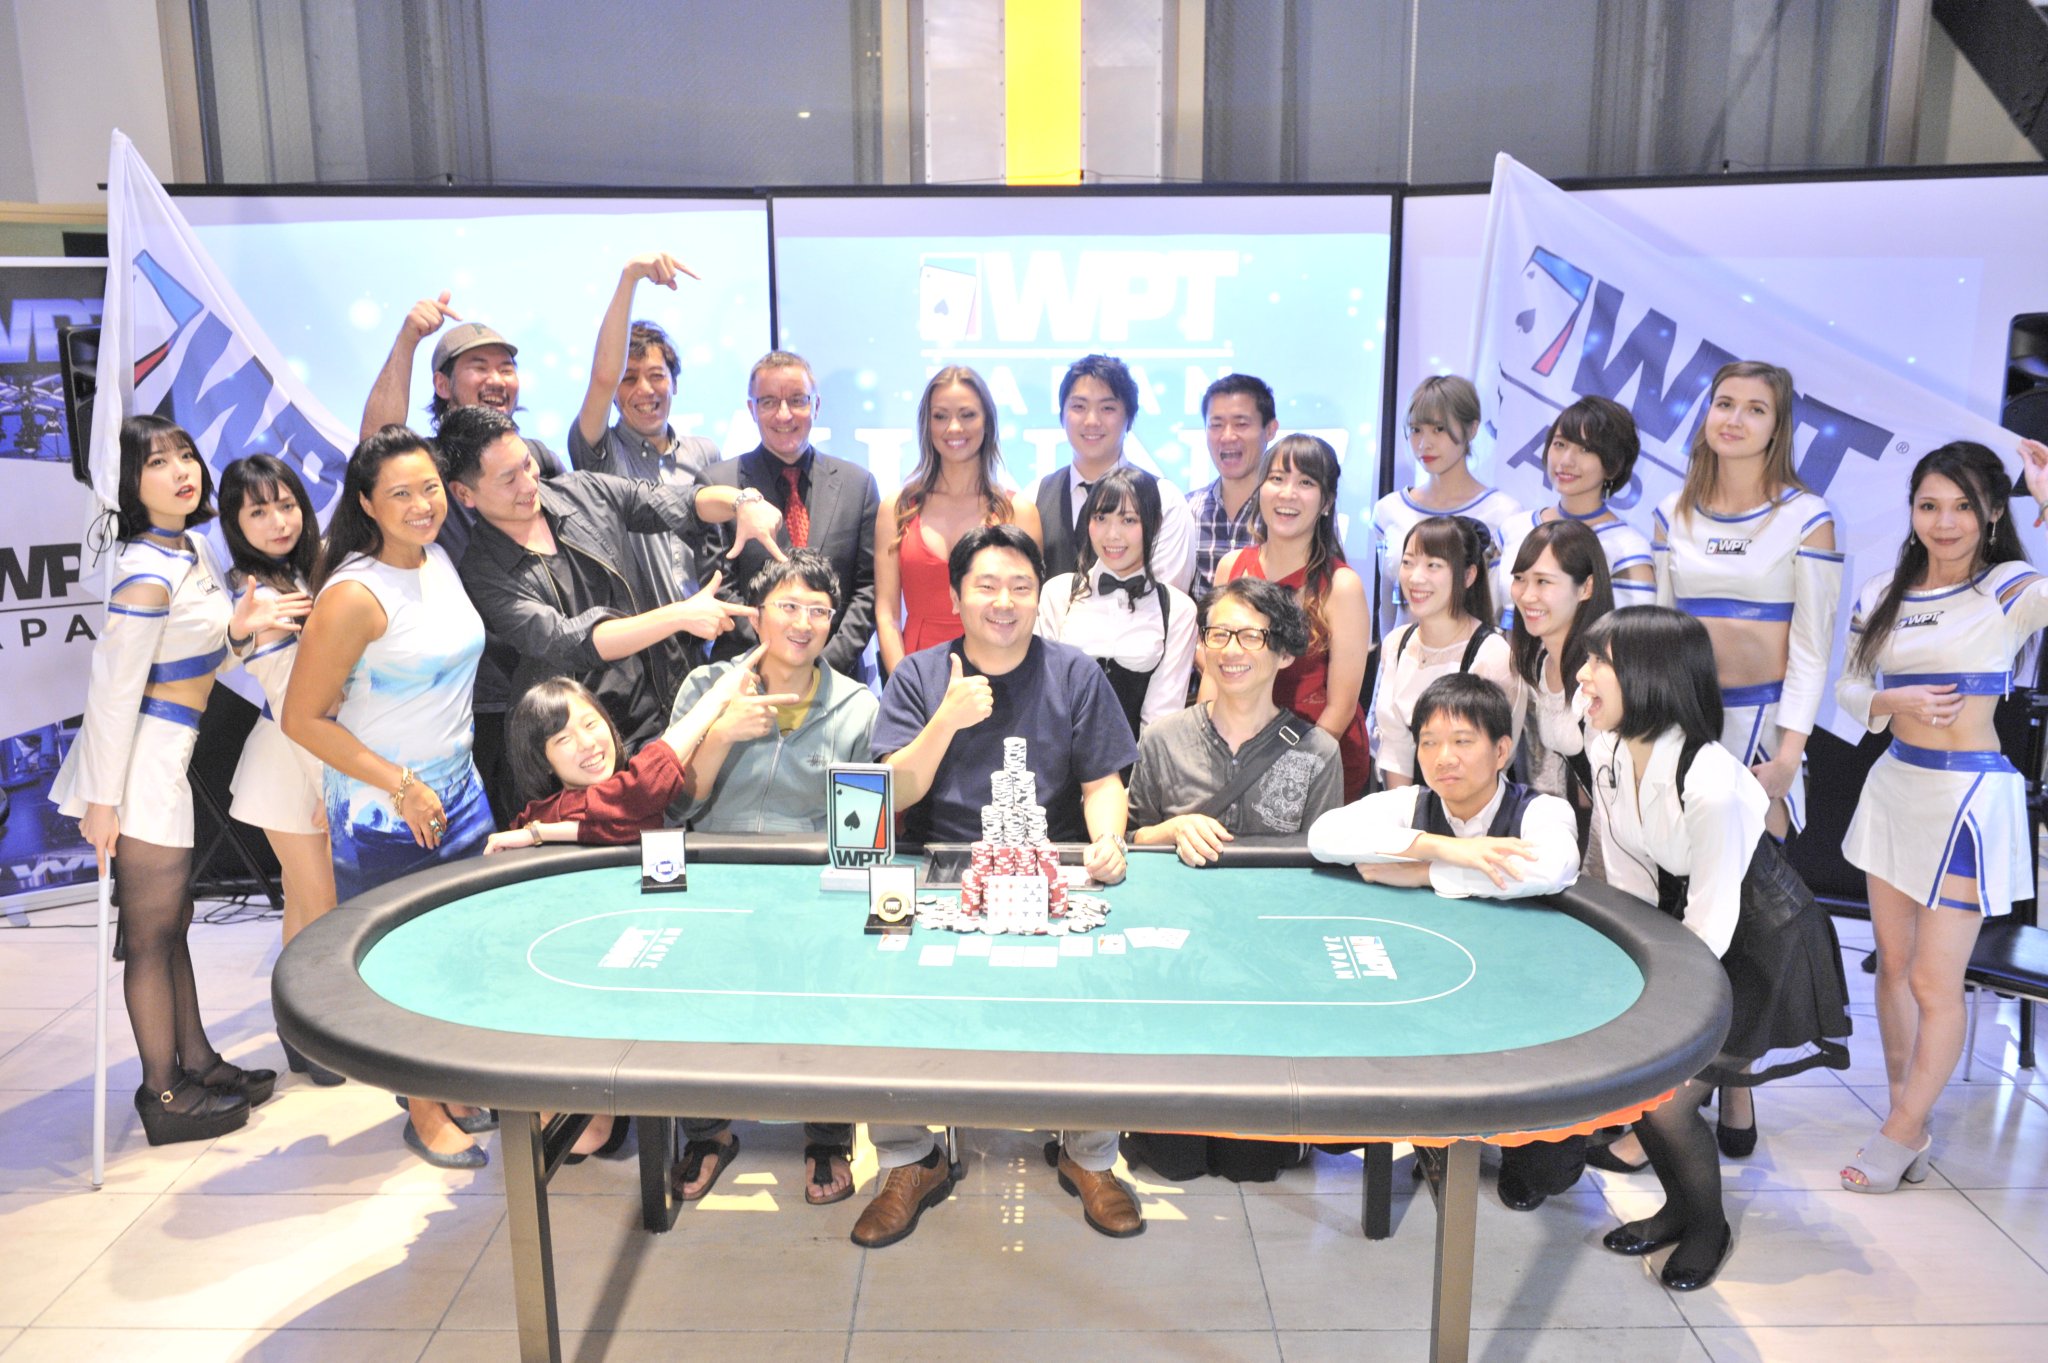 Shingo Endo Tops 322 Entrants to Win Second Ever WPT Japan Main Event